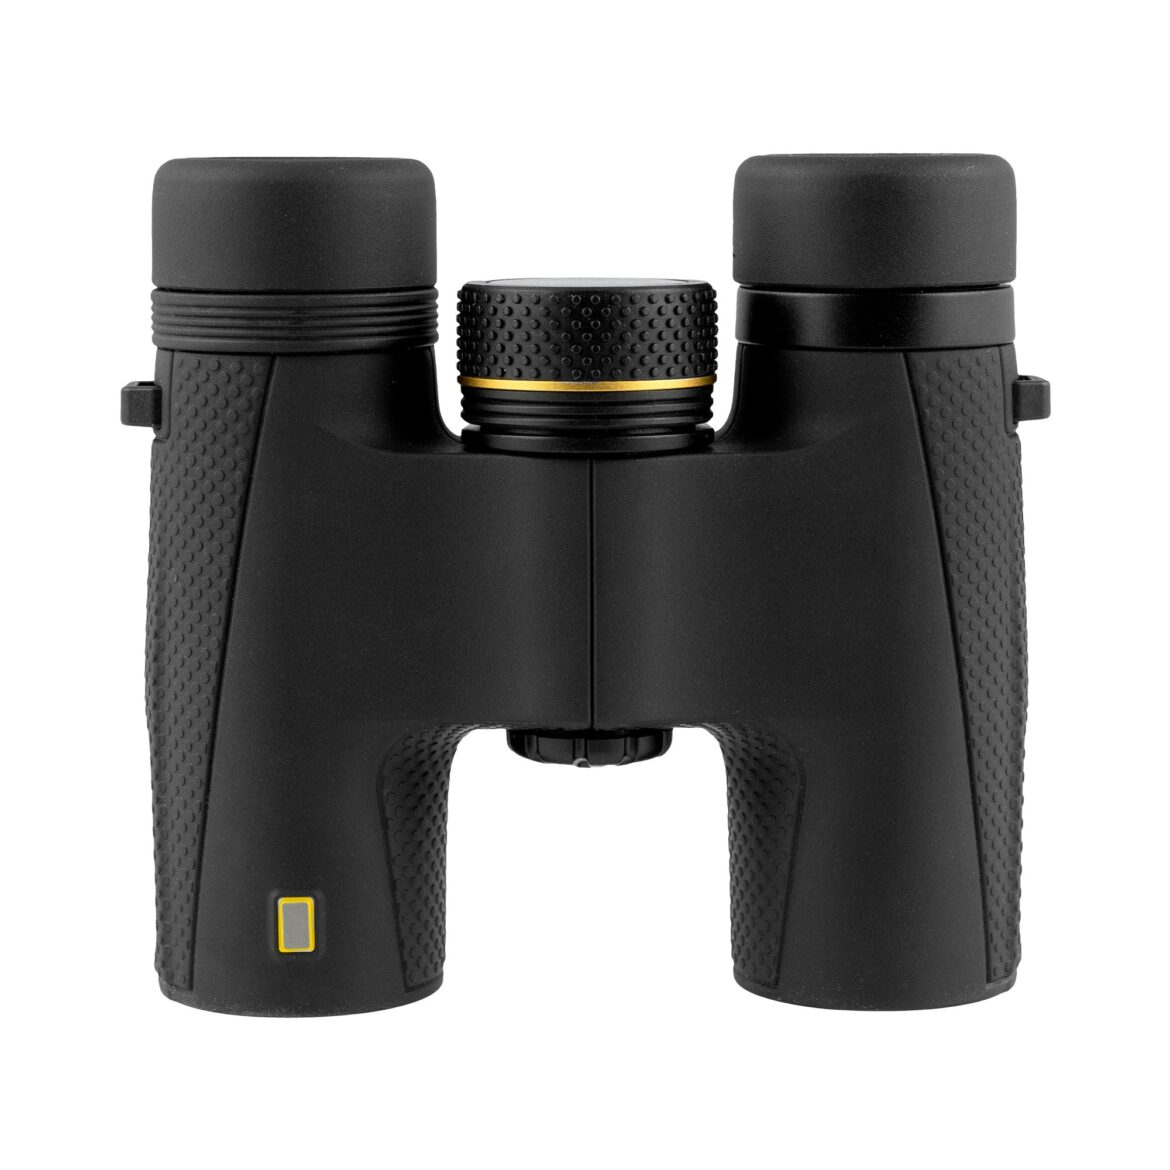 National Geographic Expedition Series 10×25 Binoculars